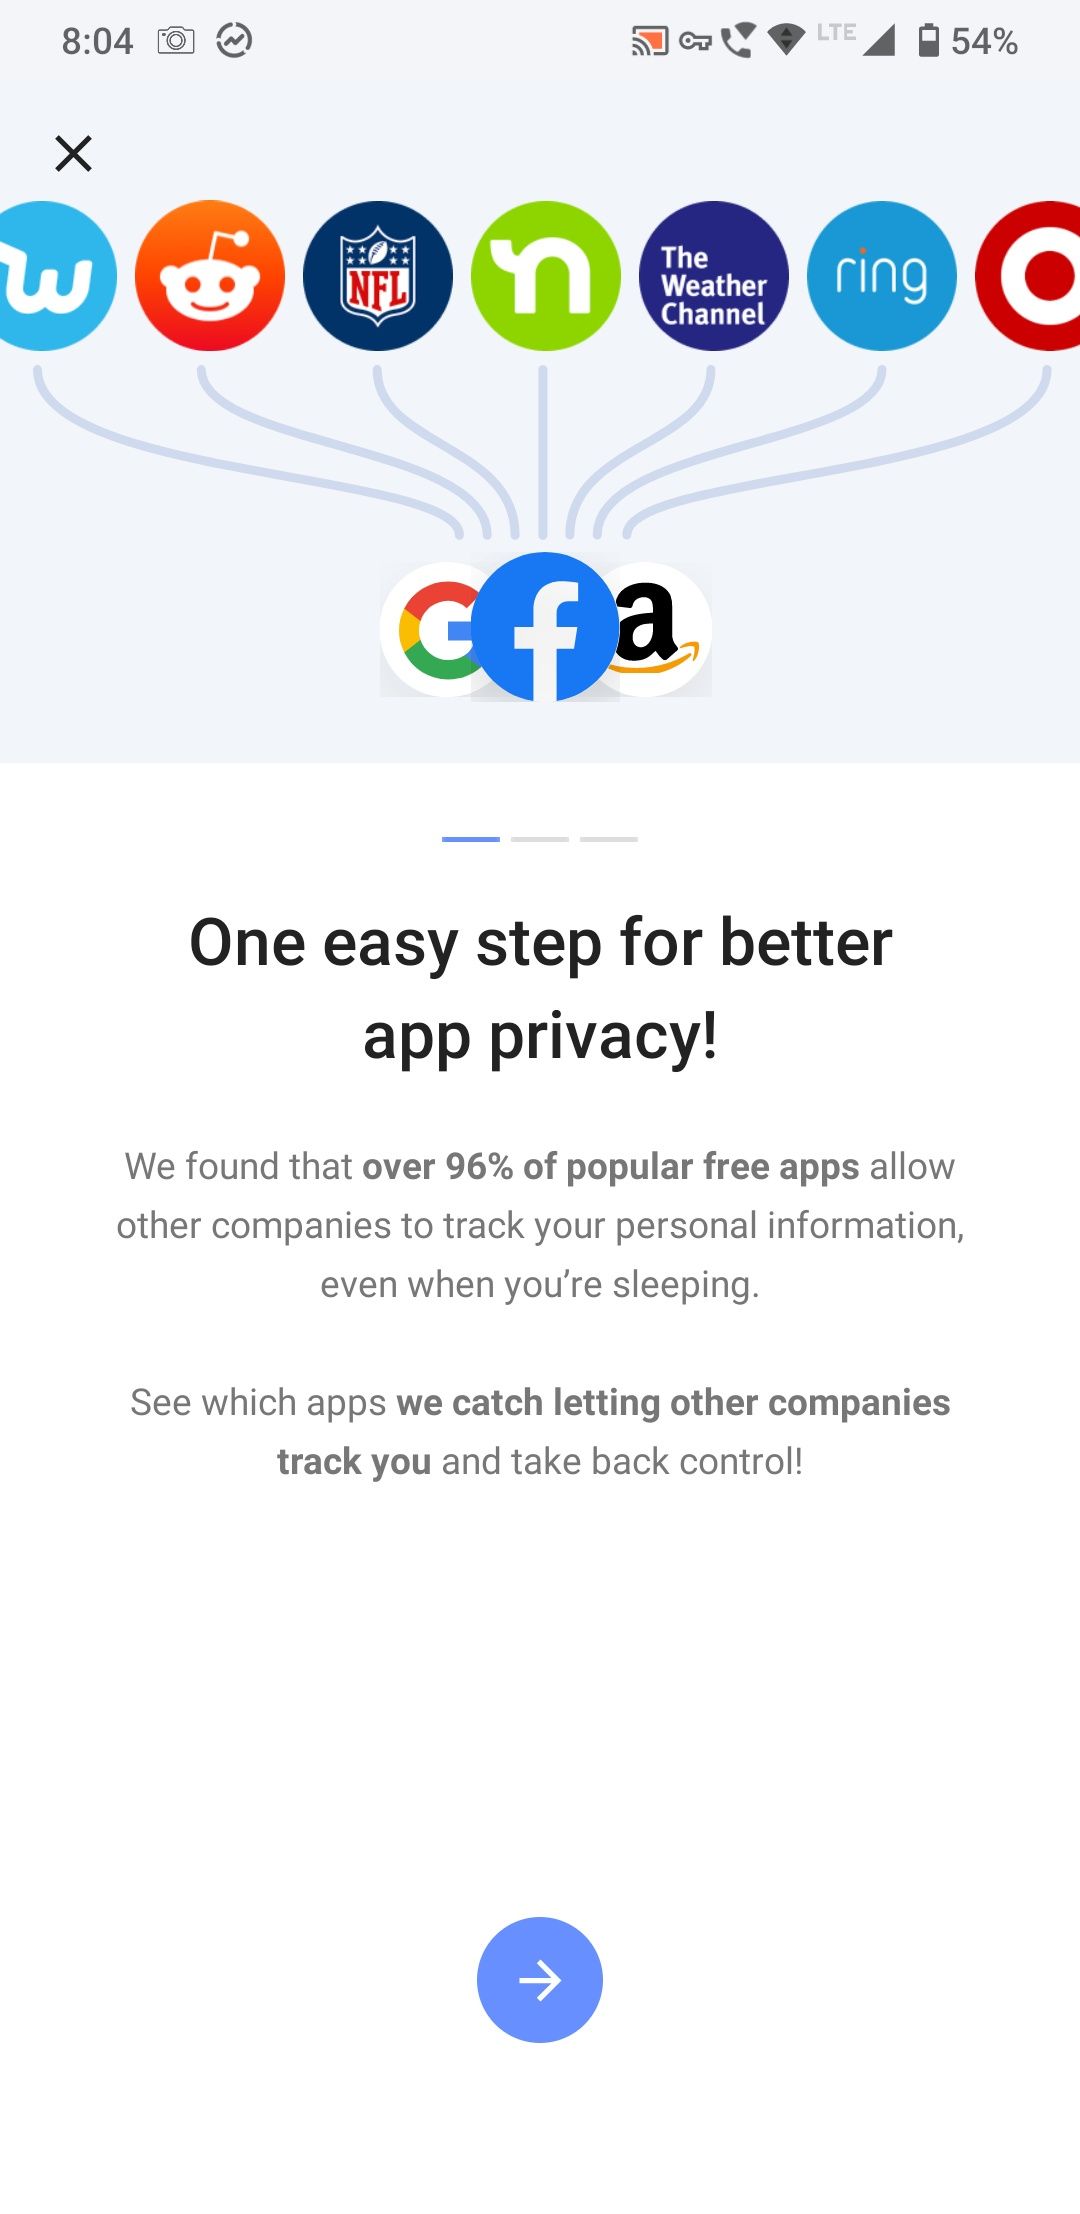 one easy step for better privacy